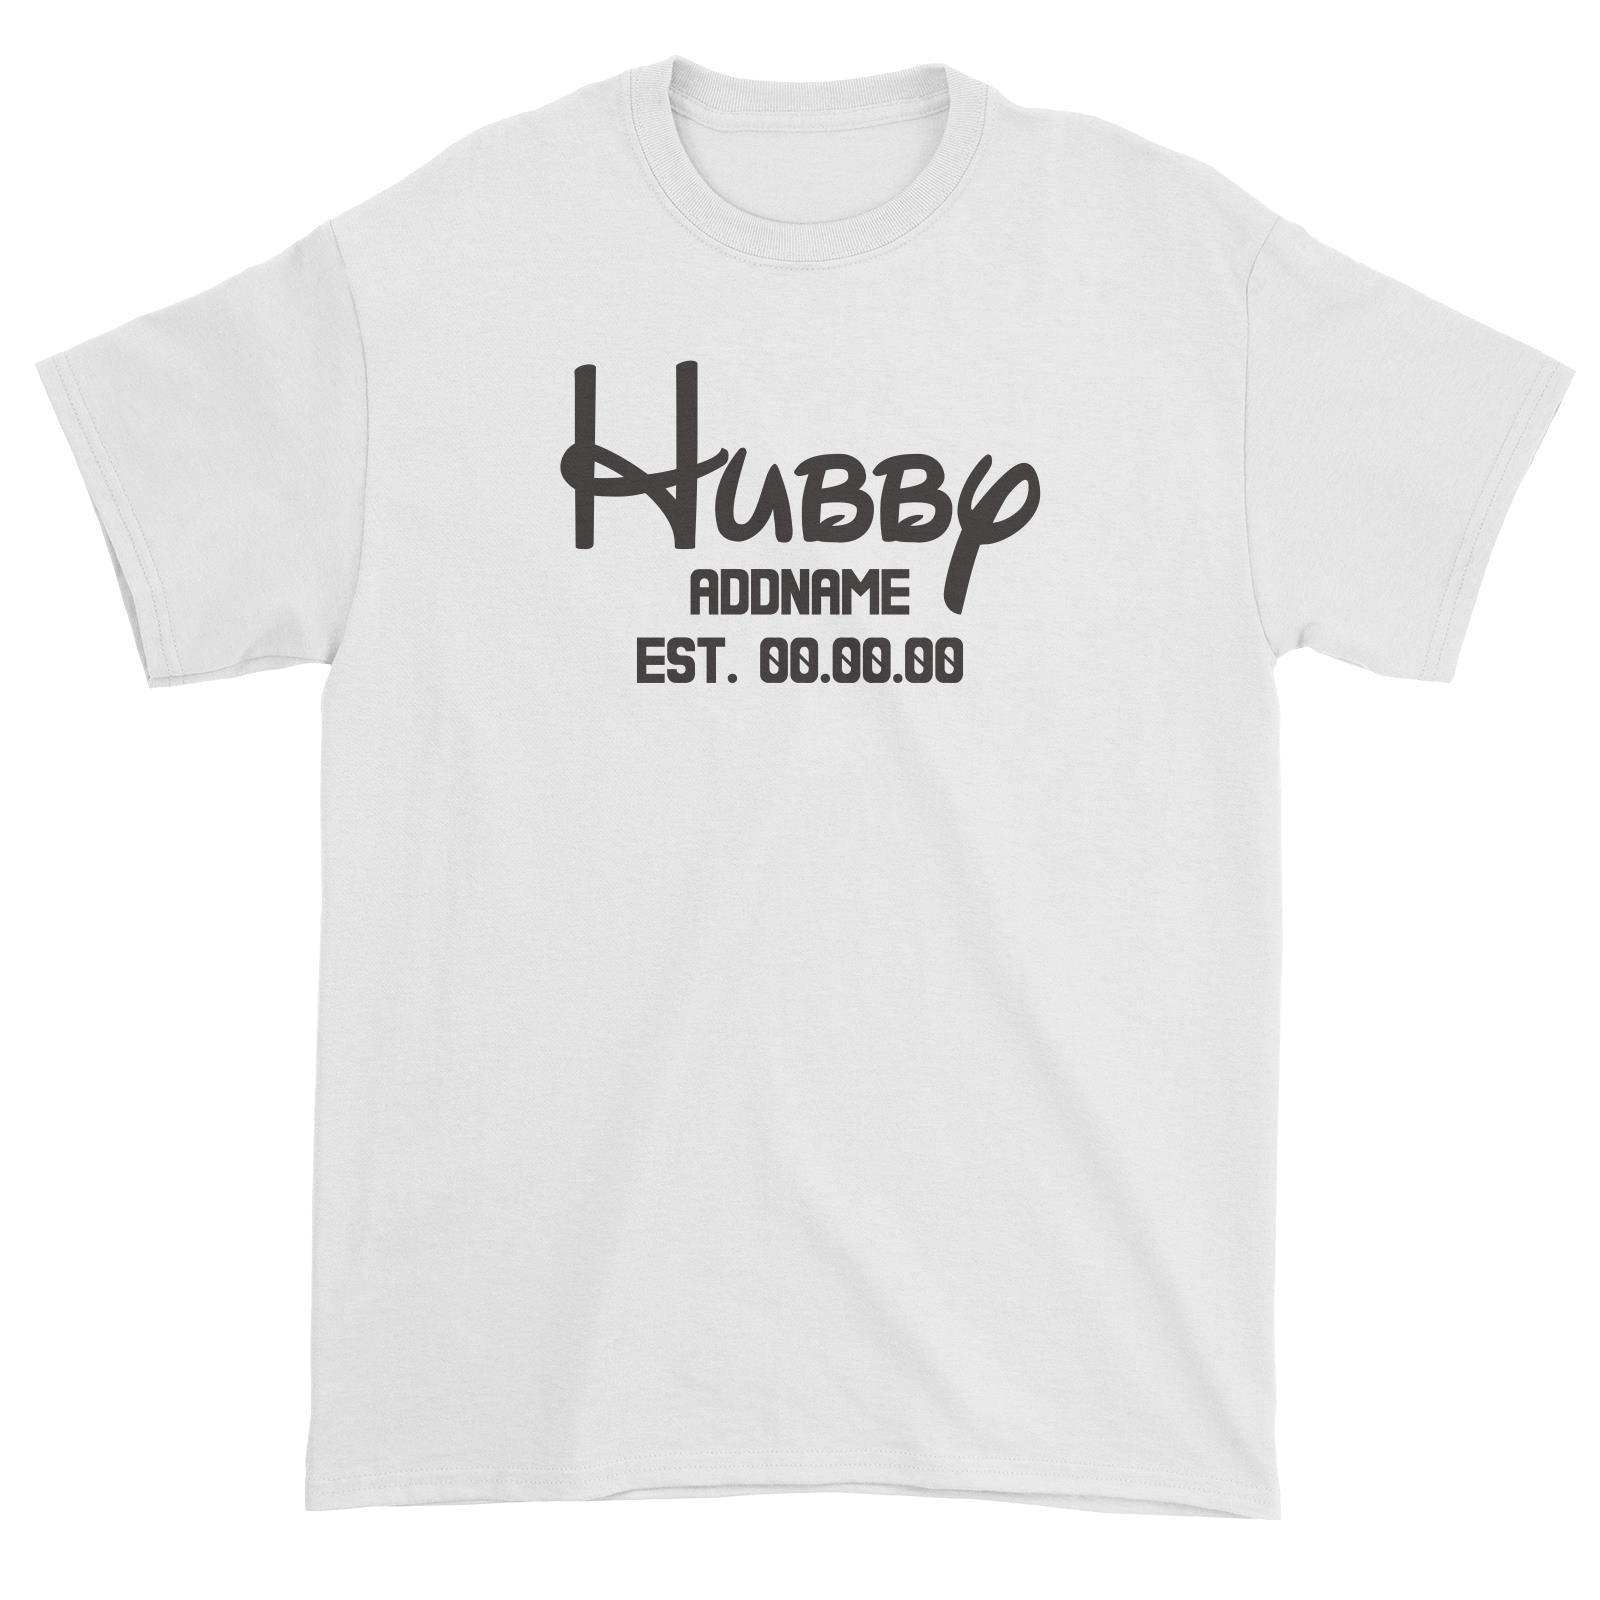 Husband and Wife Hubby Addname With Date Unisex T-Shirt